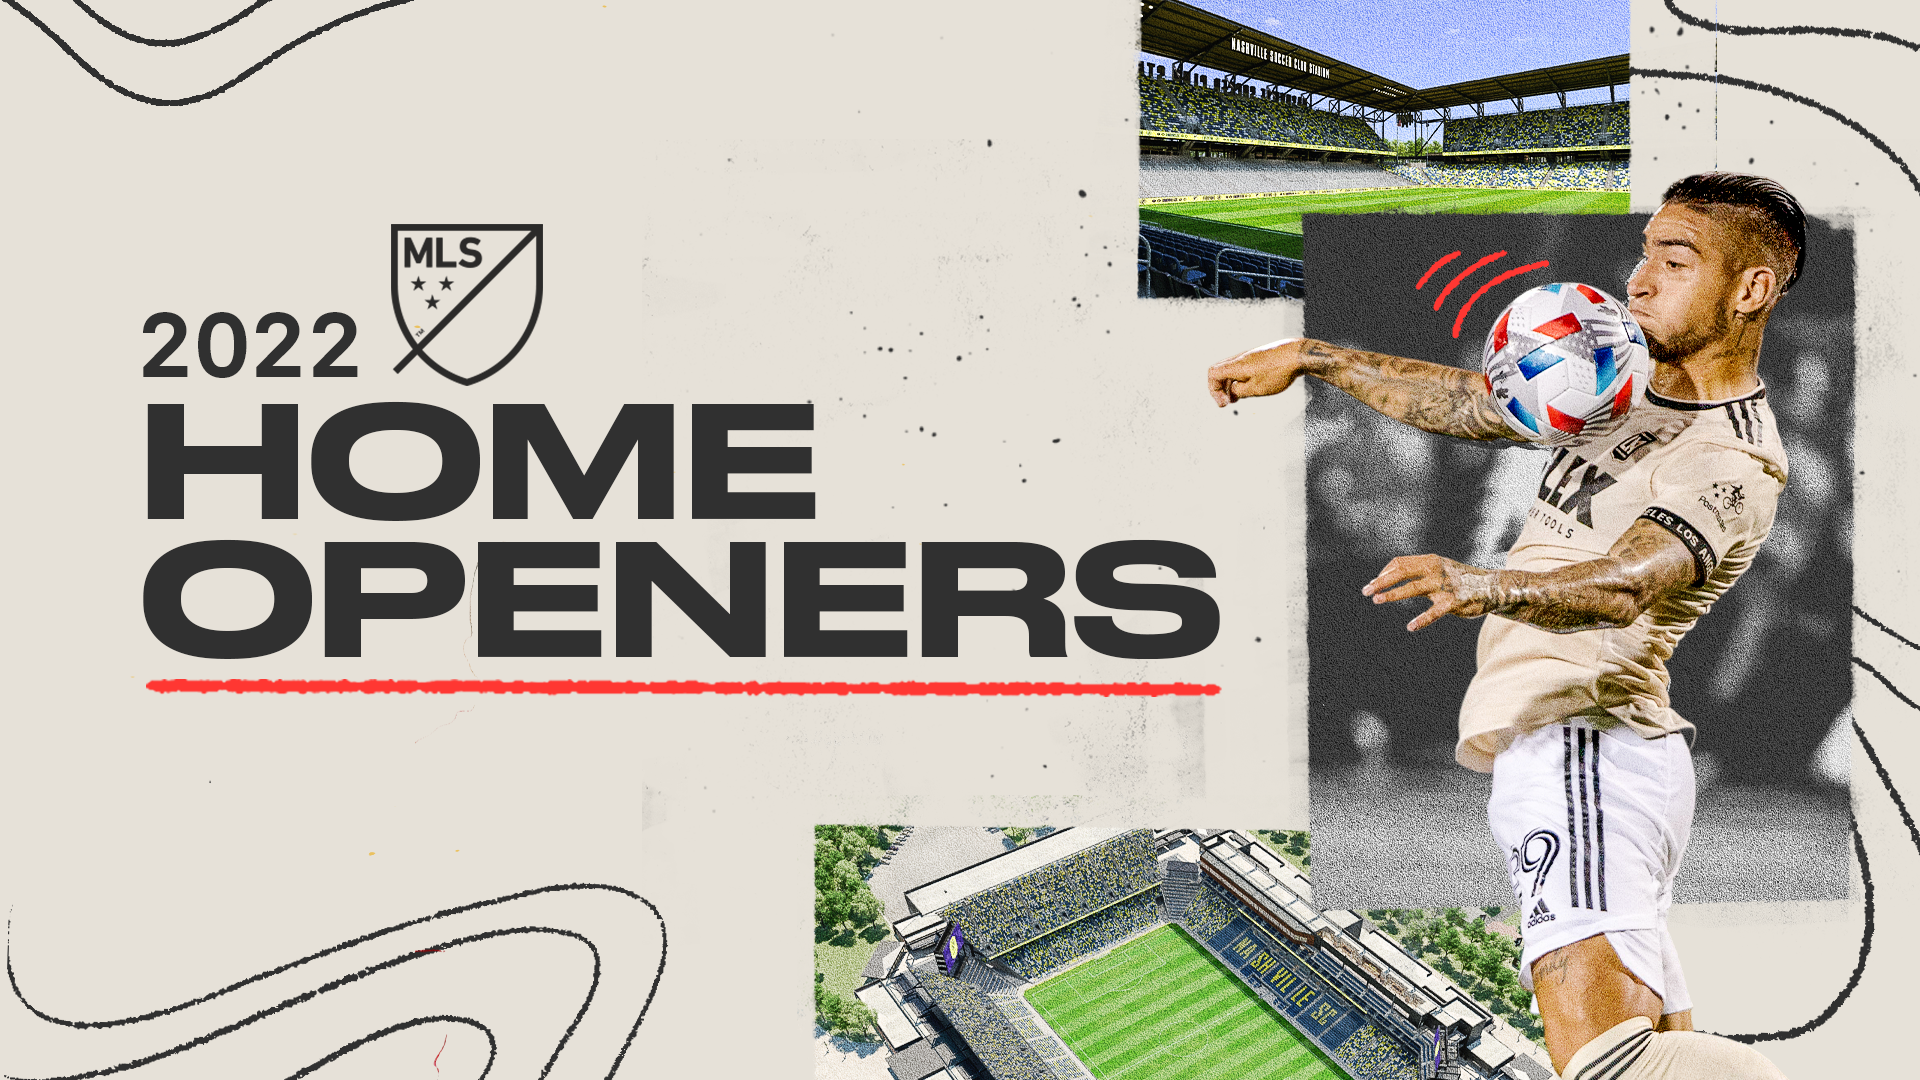 Mls Playoffs 2022 Schedule Mls Announces Home Openers For 2022 Season | Mlssoccer.com